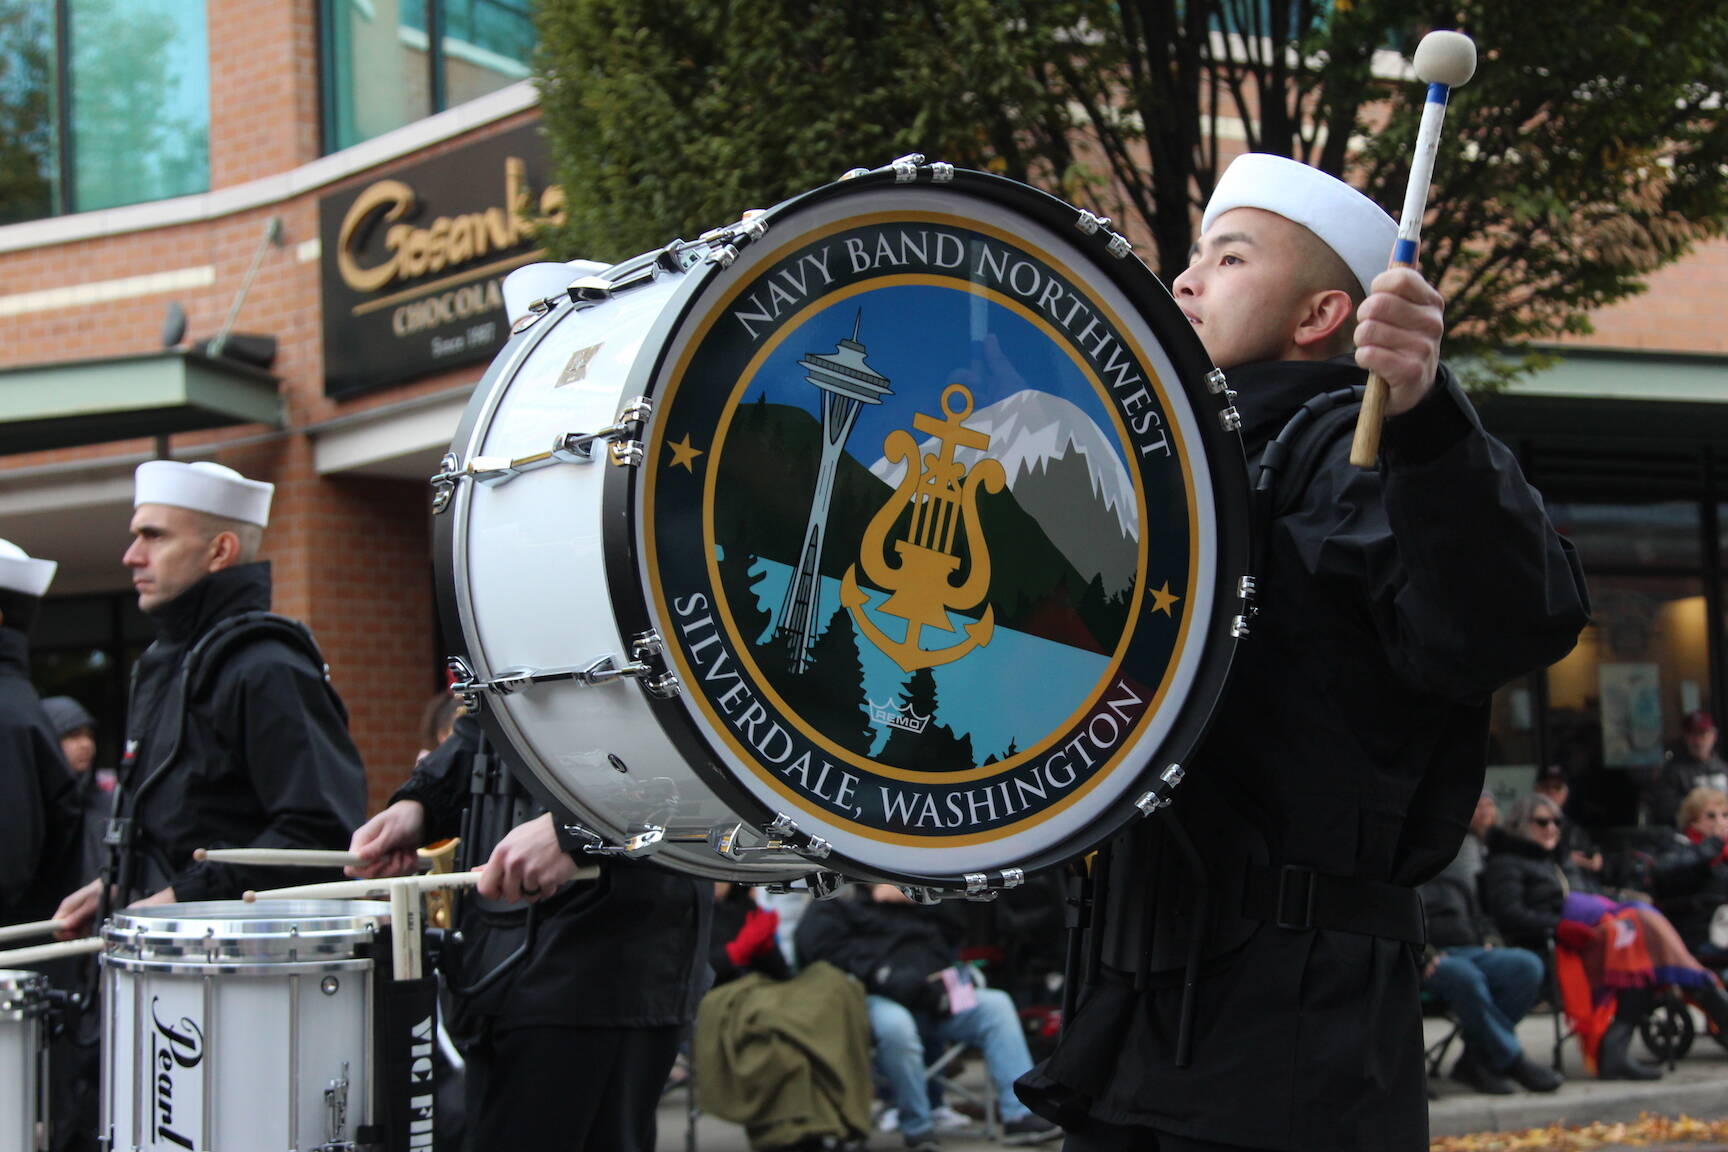 Photo courtesy of the City of Auburn
The Navy Band of the Northwest participated in the 2022 parade.